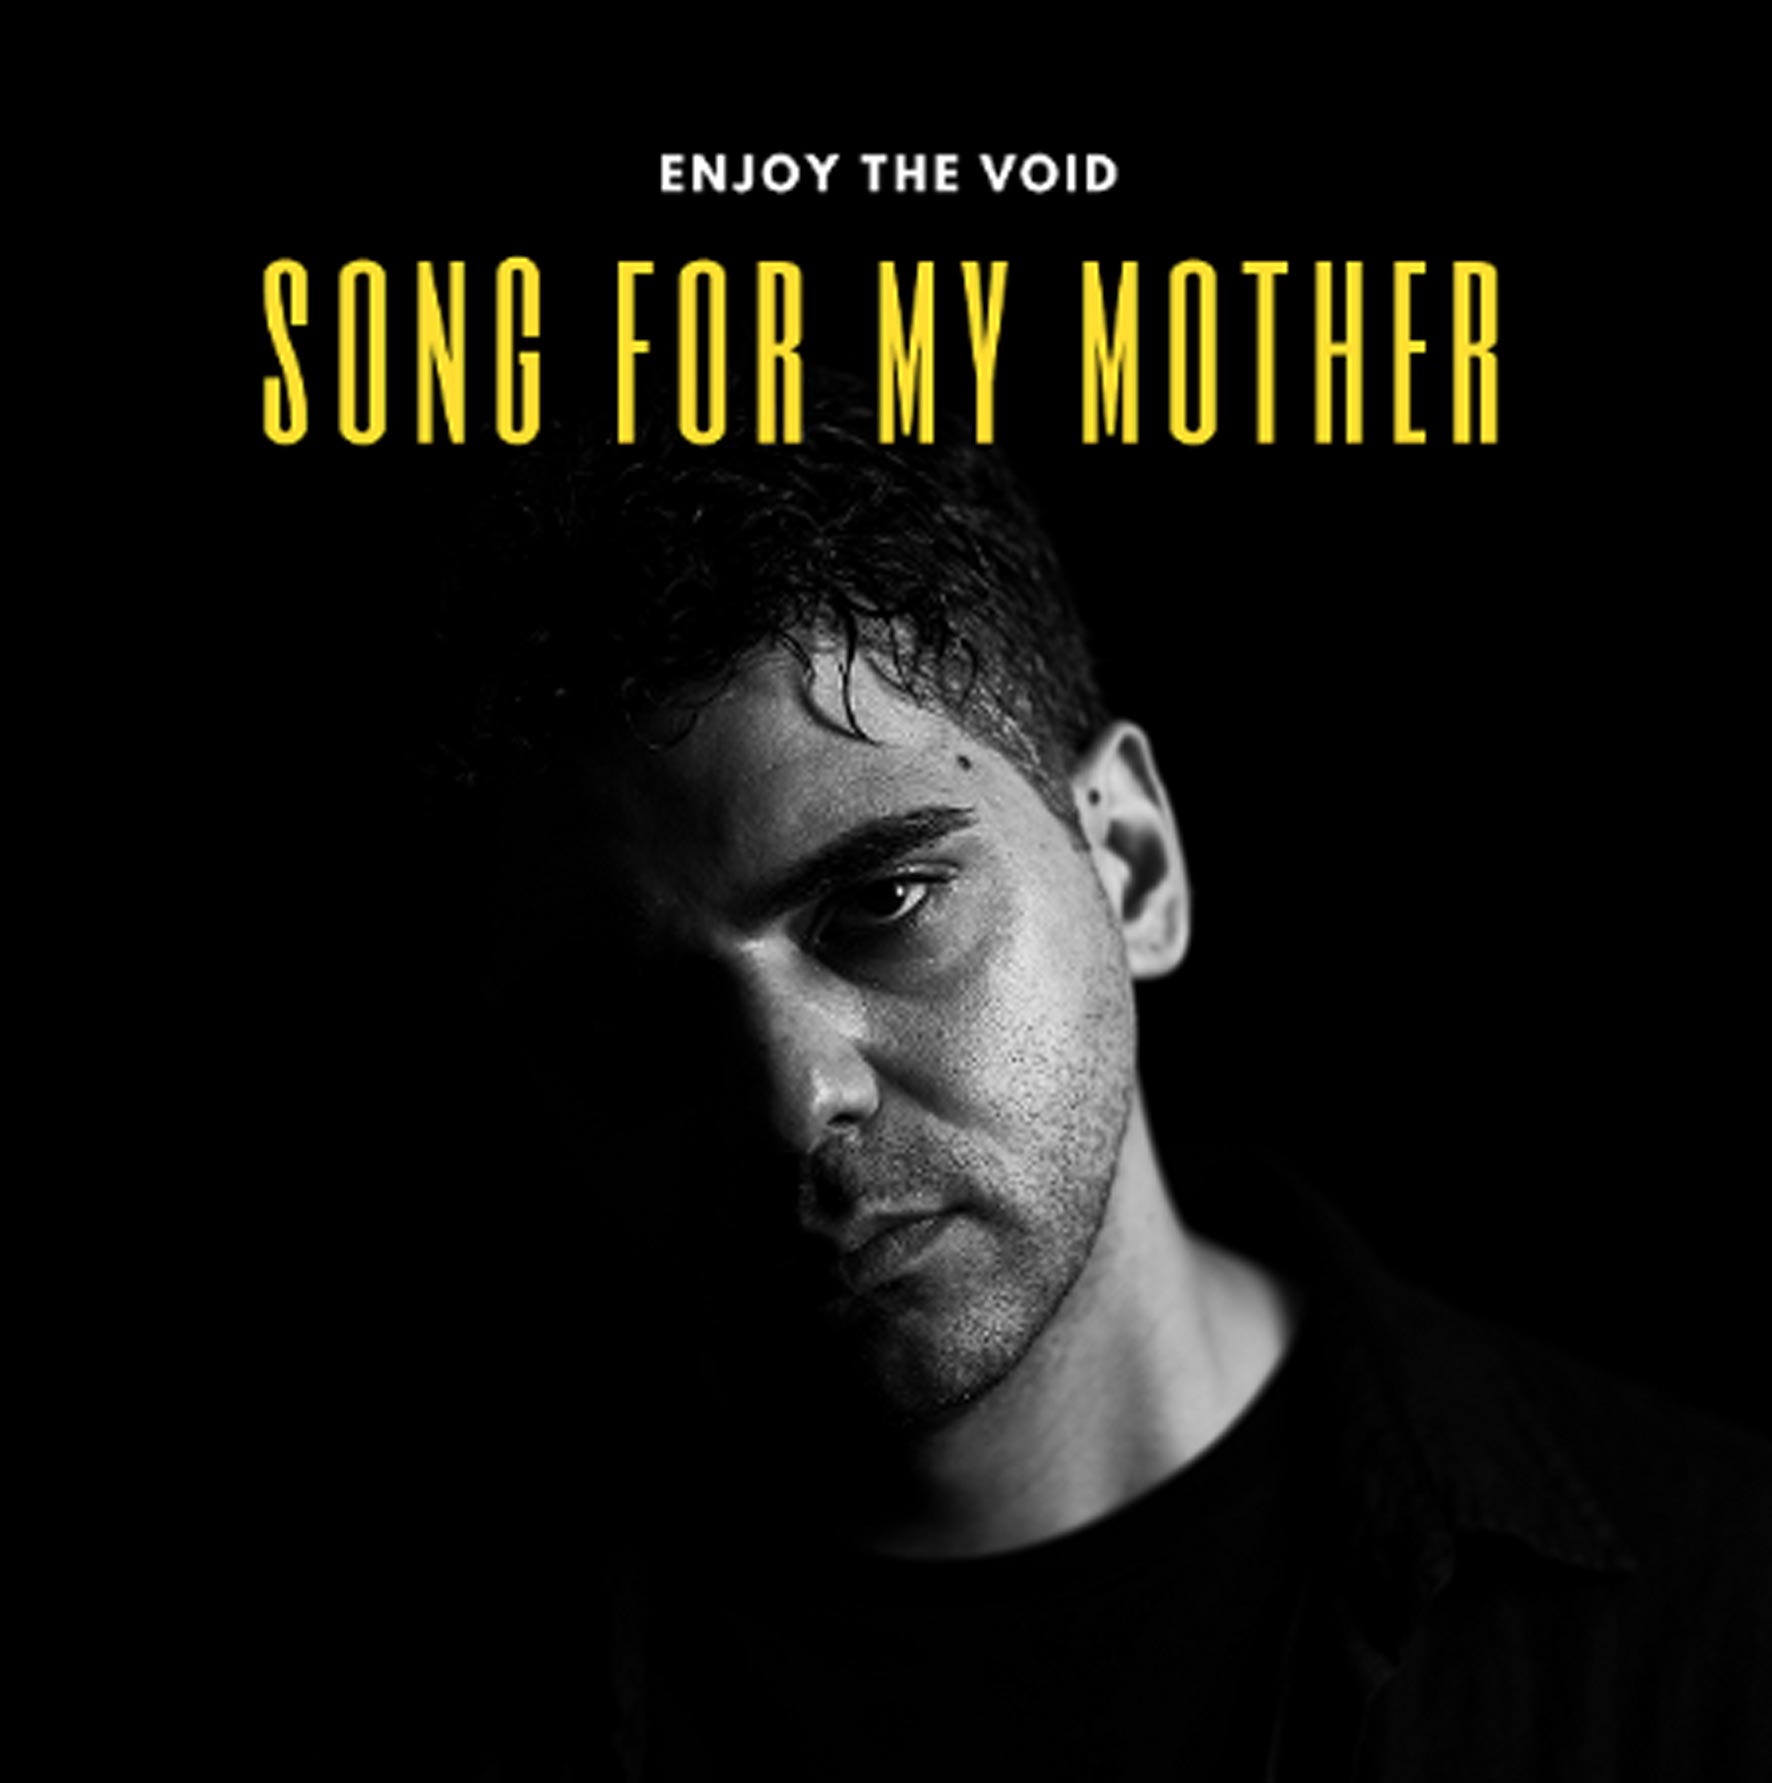 Esce, per Rehegoo Music Group, “Song for My Mother”, il nuovo brano degli Enjoy the Void